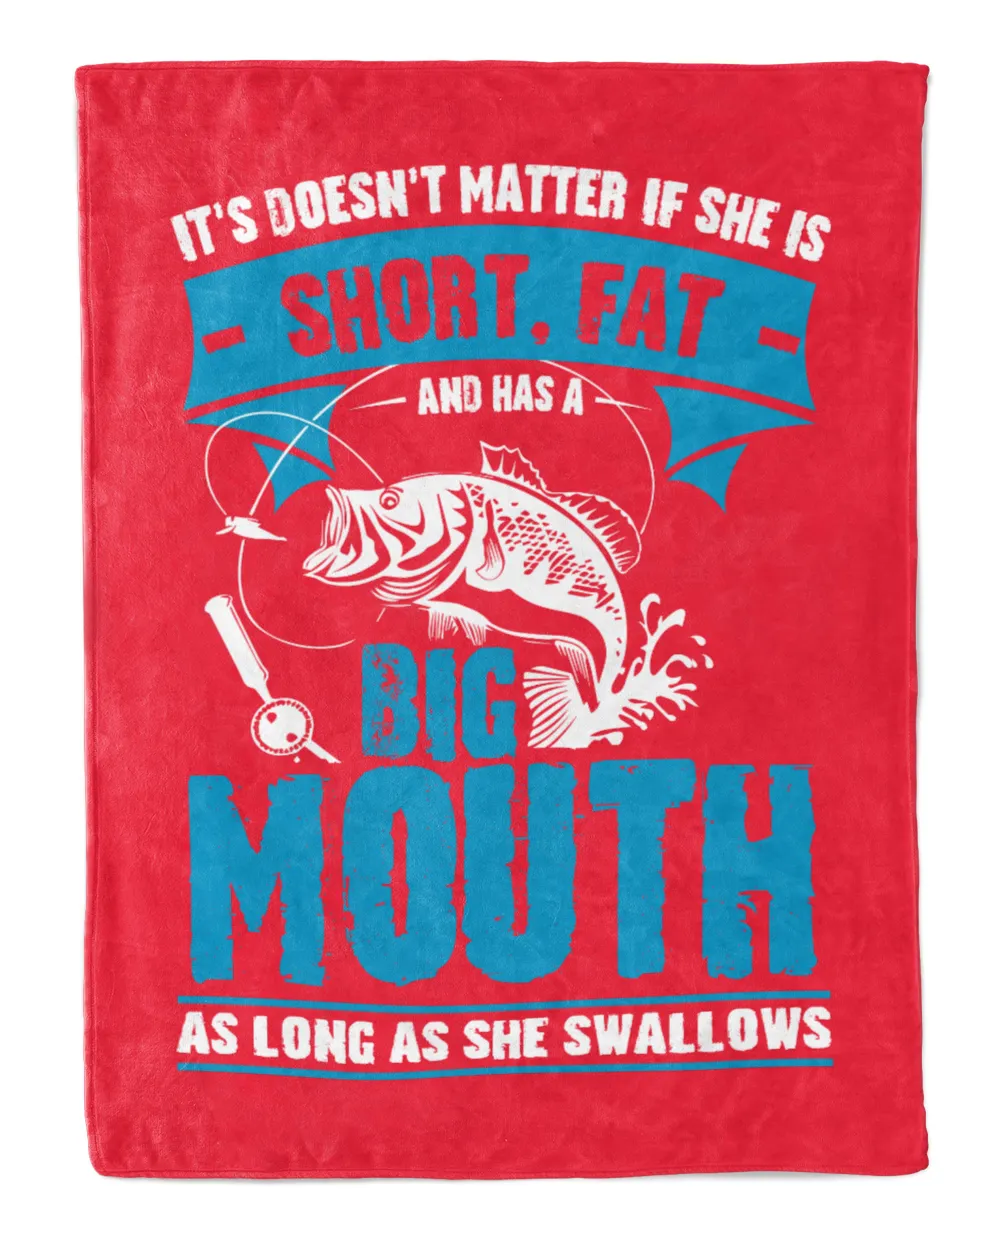 It's Doesn't Matter If She Is Short Fat And Has A Big Mouth As Long As She Swallows